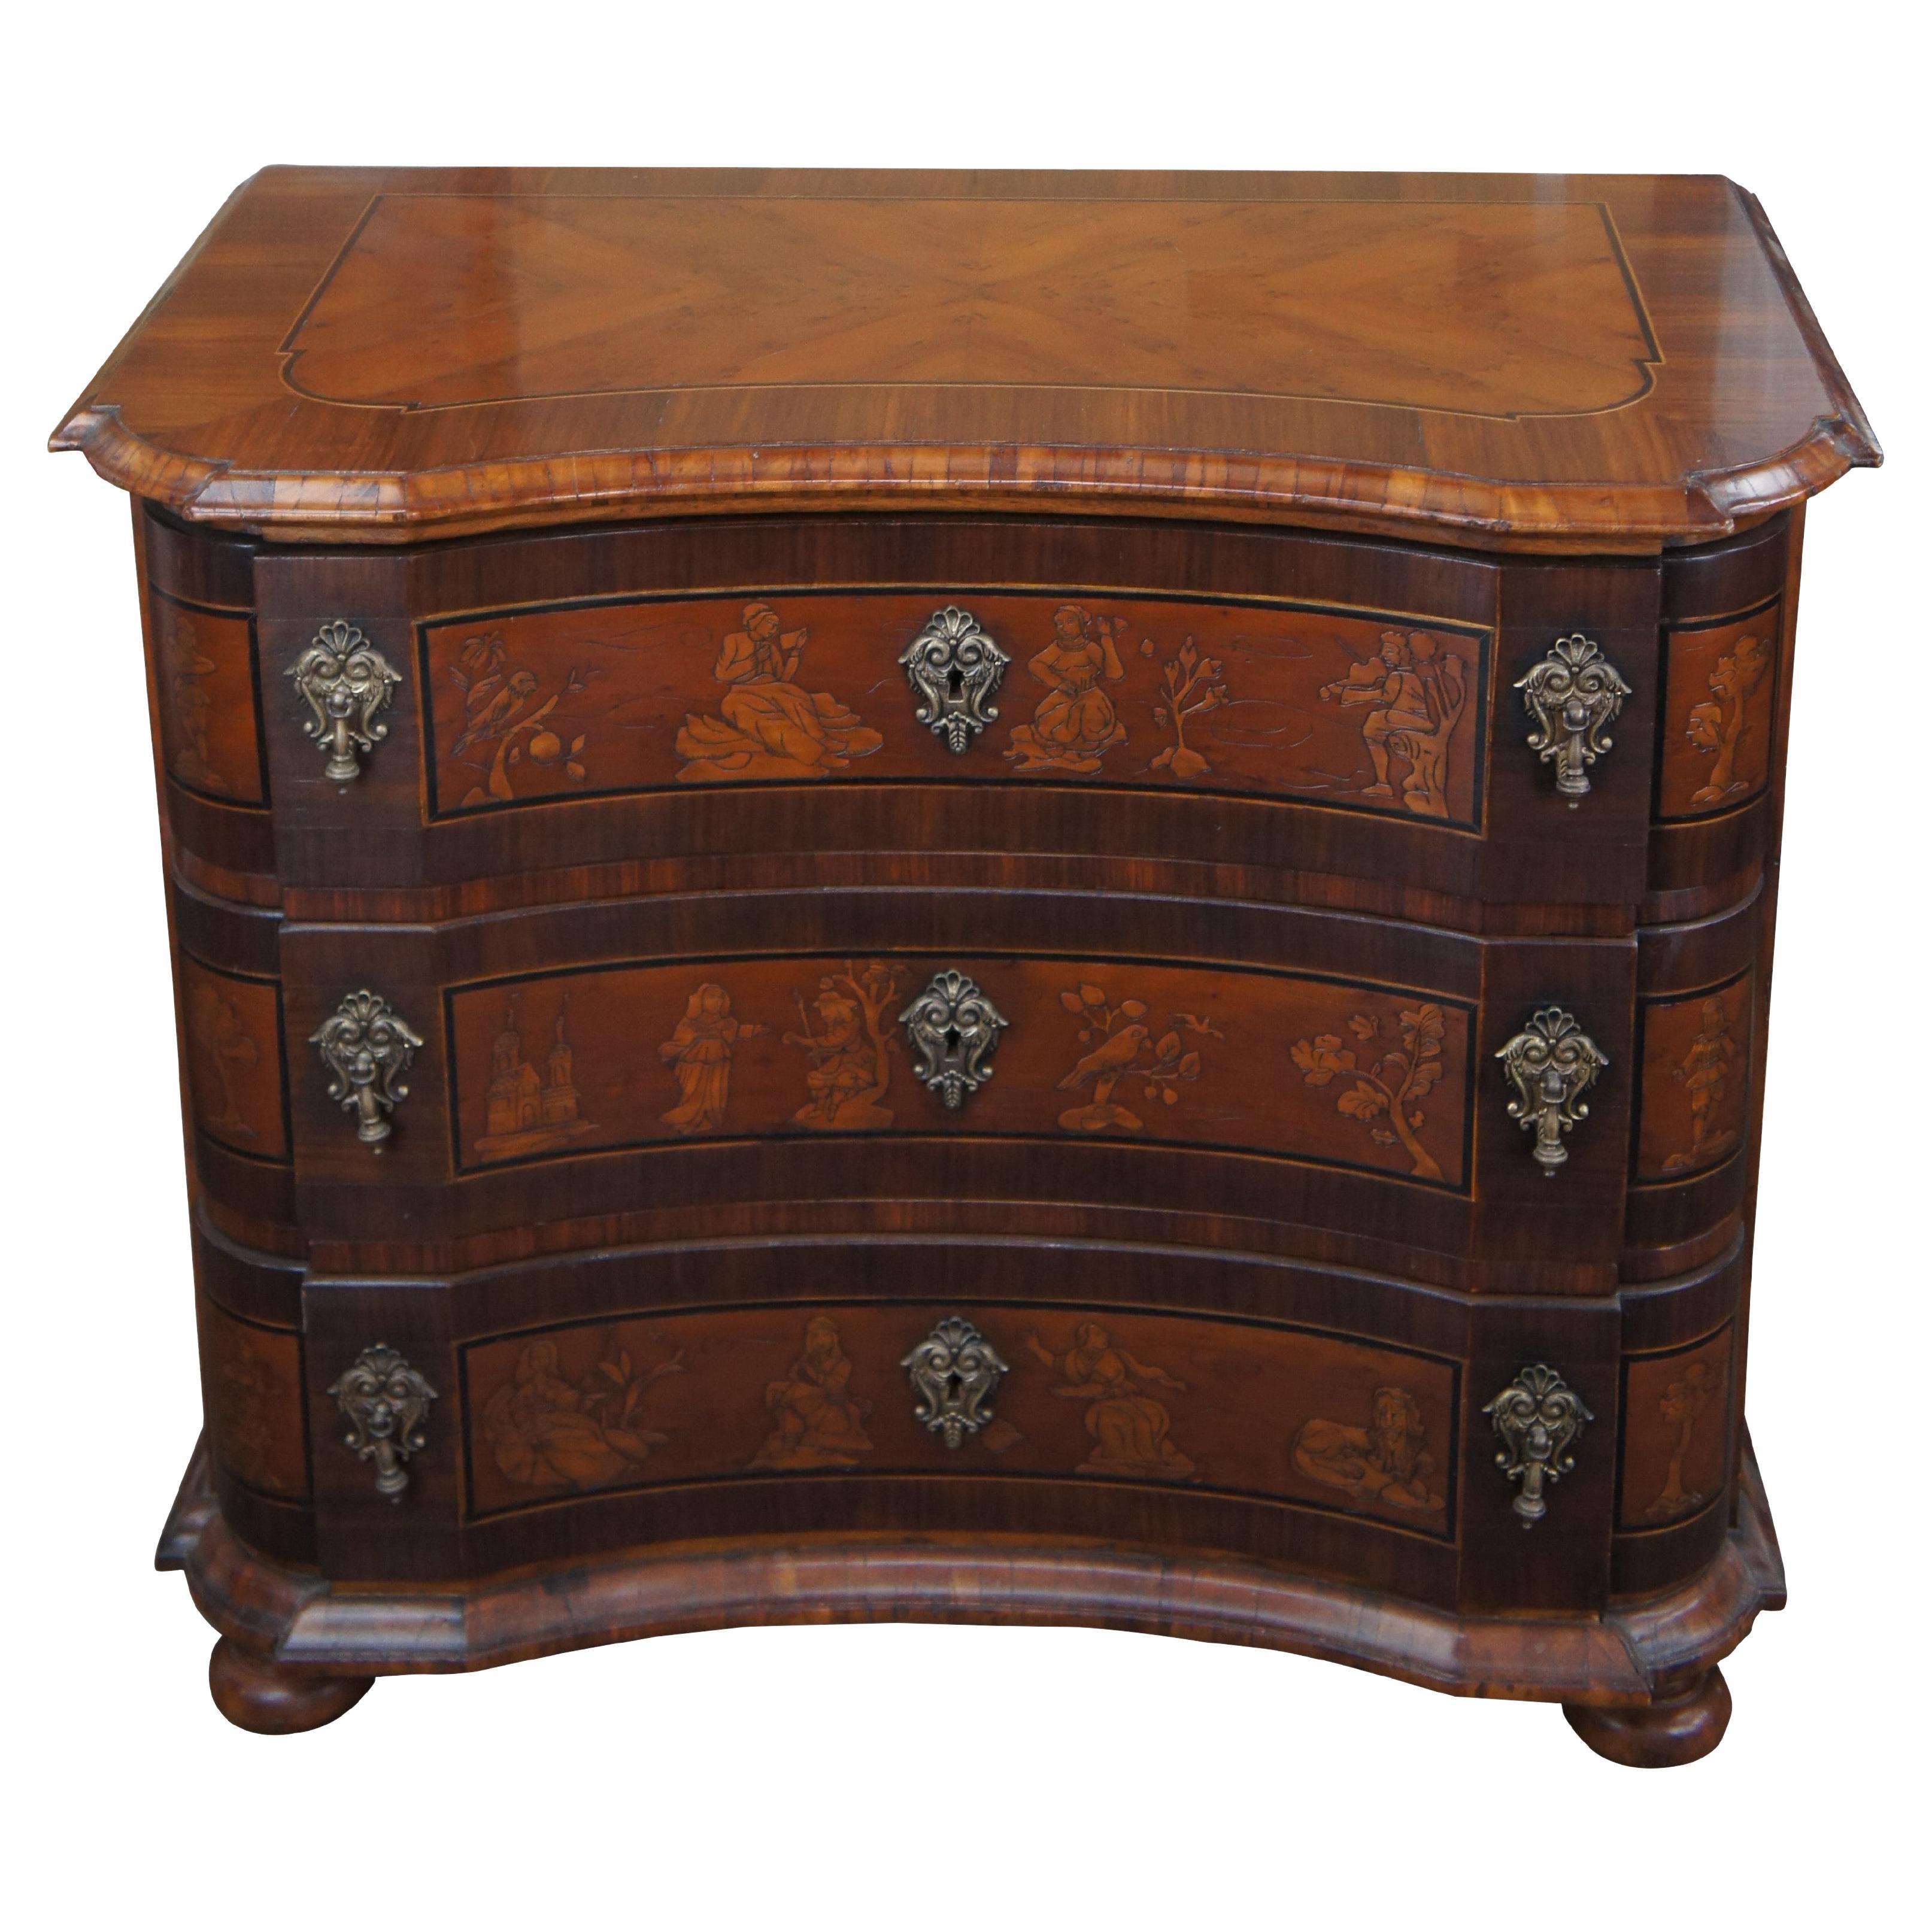 Alfonso Marina Siena Mahogany Walnut Burl Chinoiserie Chest of Drawers Commode For Sale